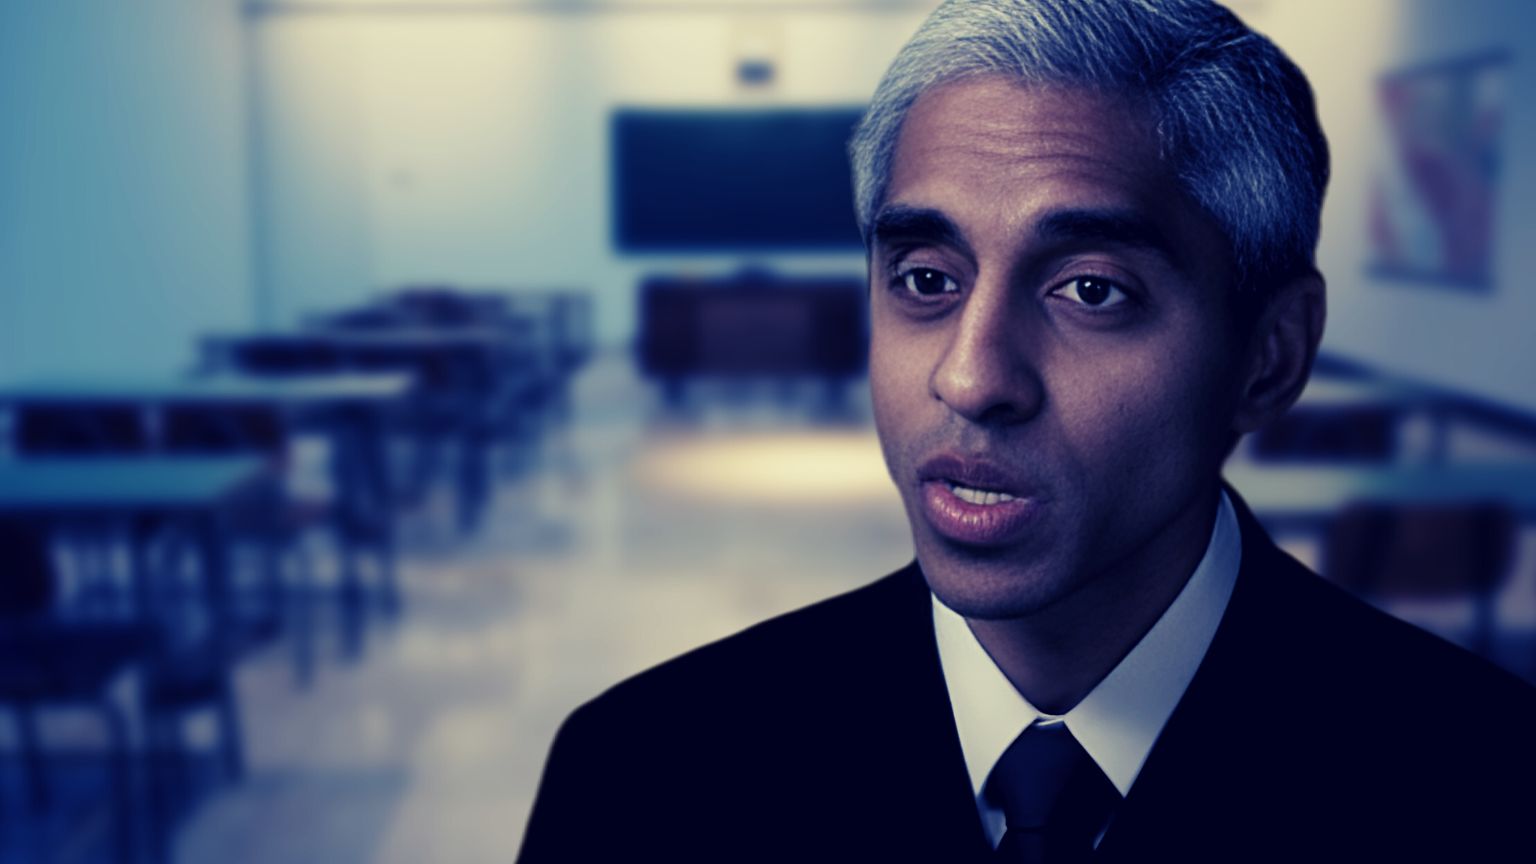 US Surgeon General Boasted About Working With Big Tech To Tackle “Misinformation,” Documents Show